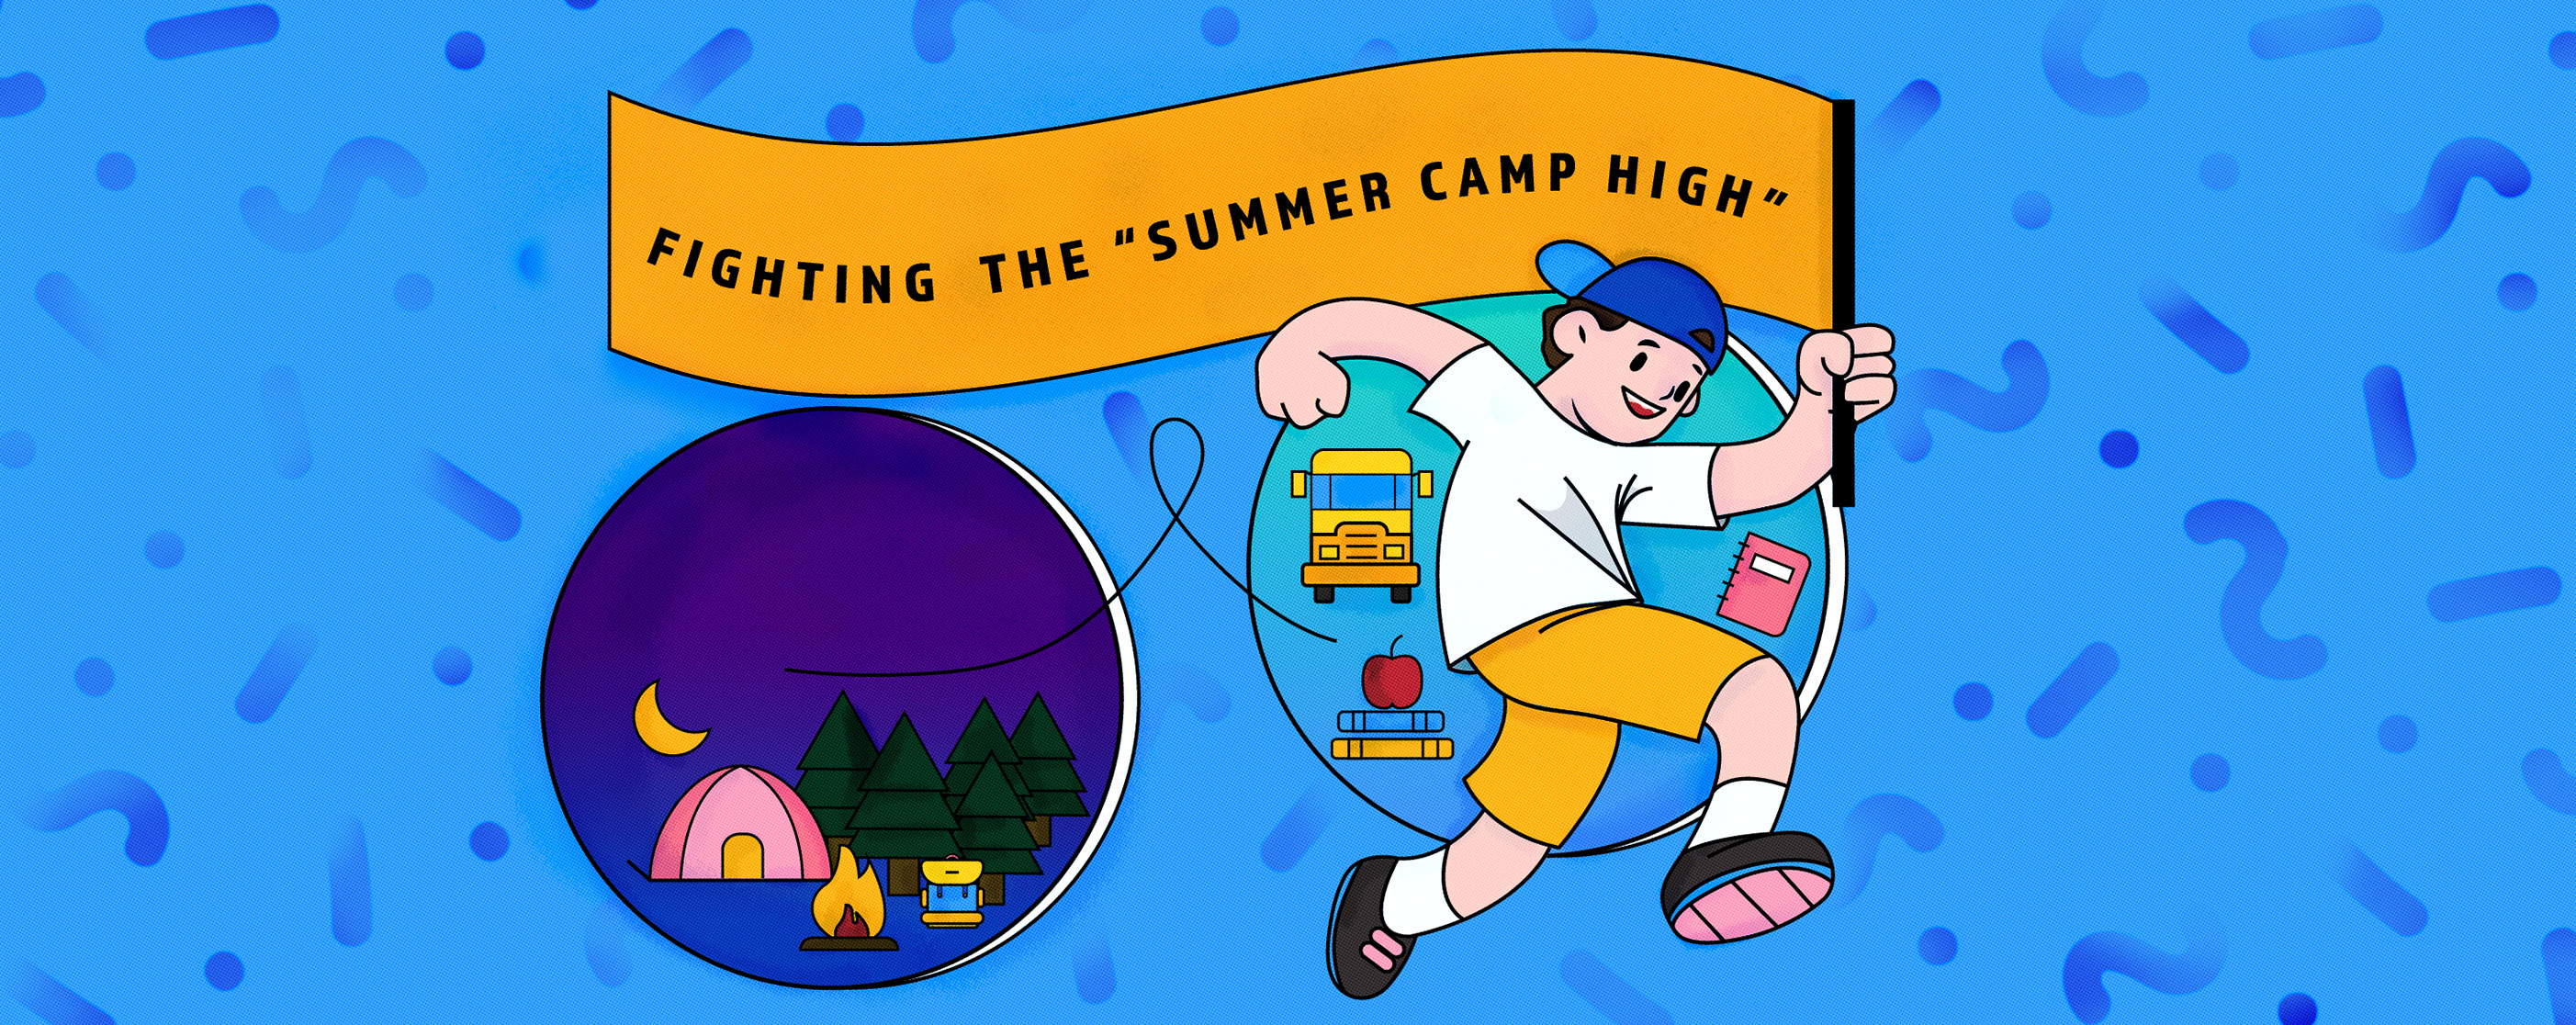 Fighting the “Summer Camp High”